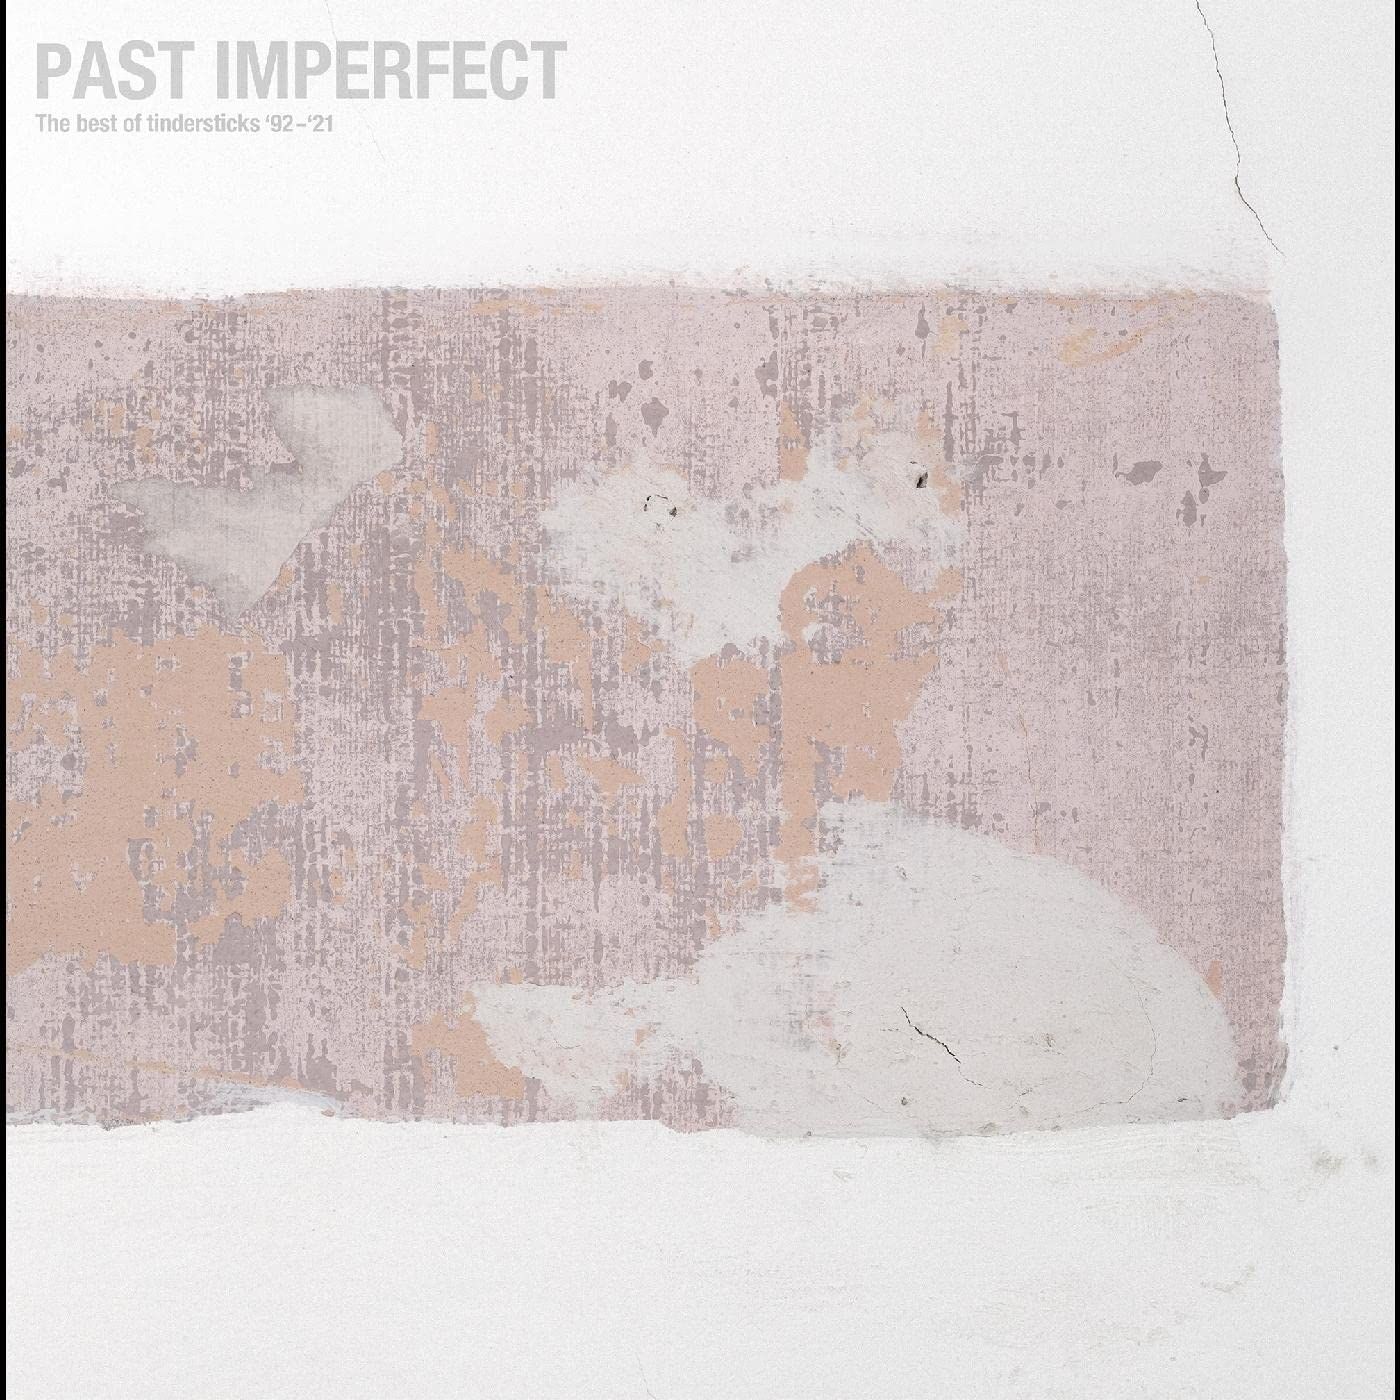 PAST IMPERFECT THE BEST OF TINDERSTICKS